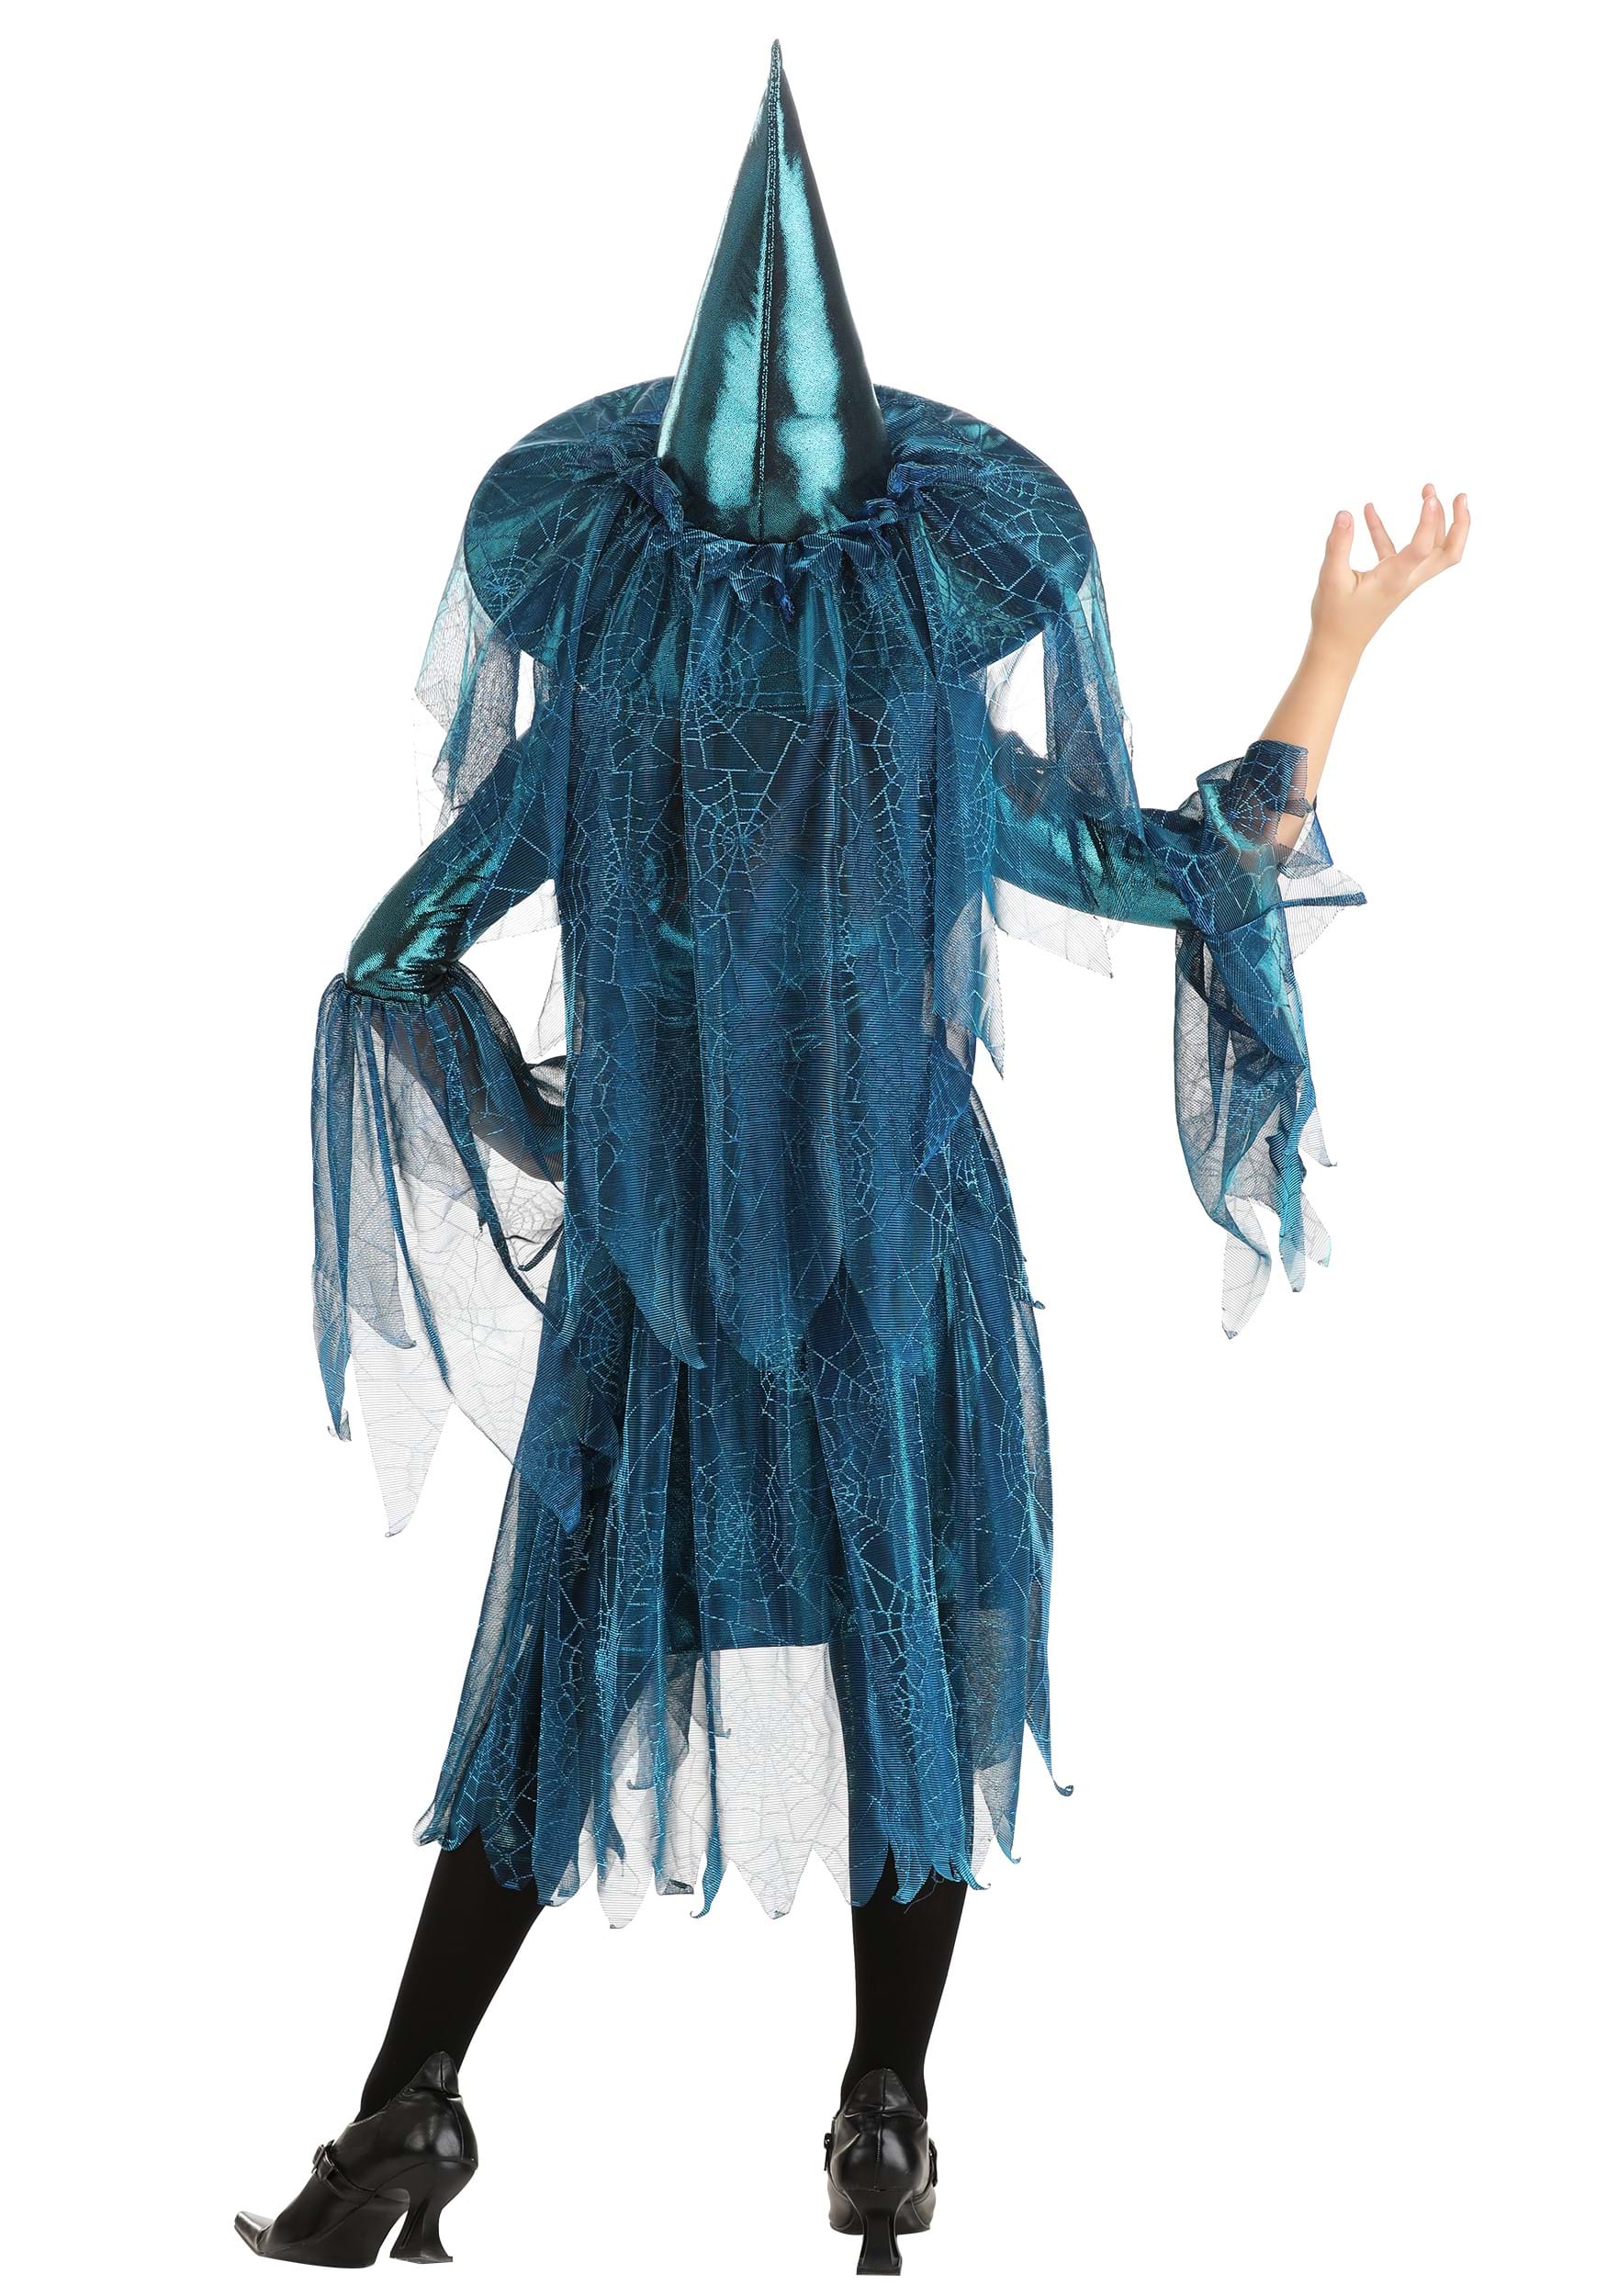 Moonlight Spider Witch Girl's Costume